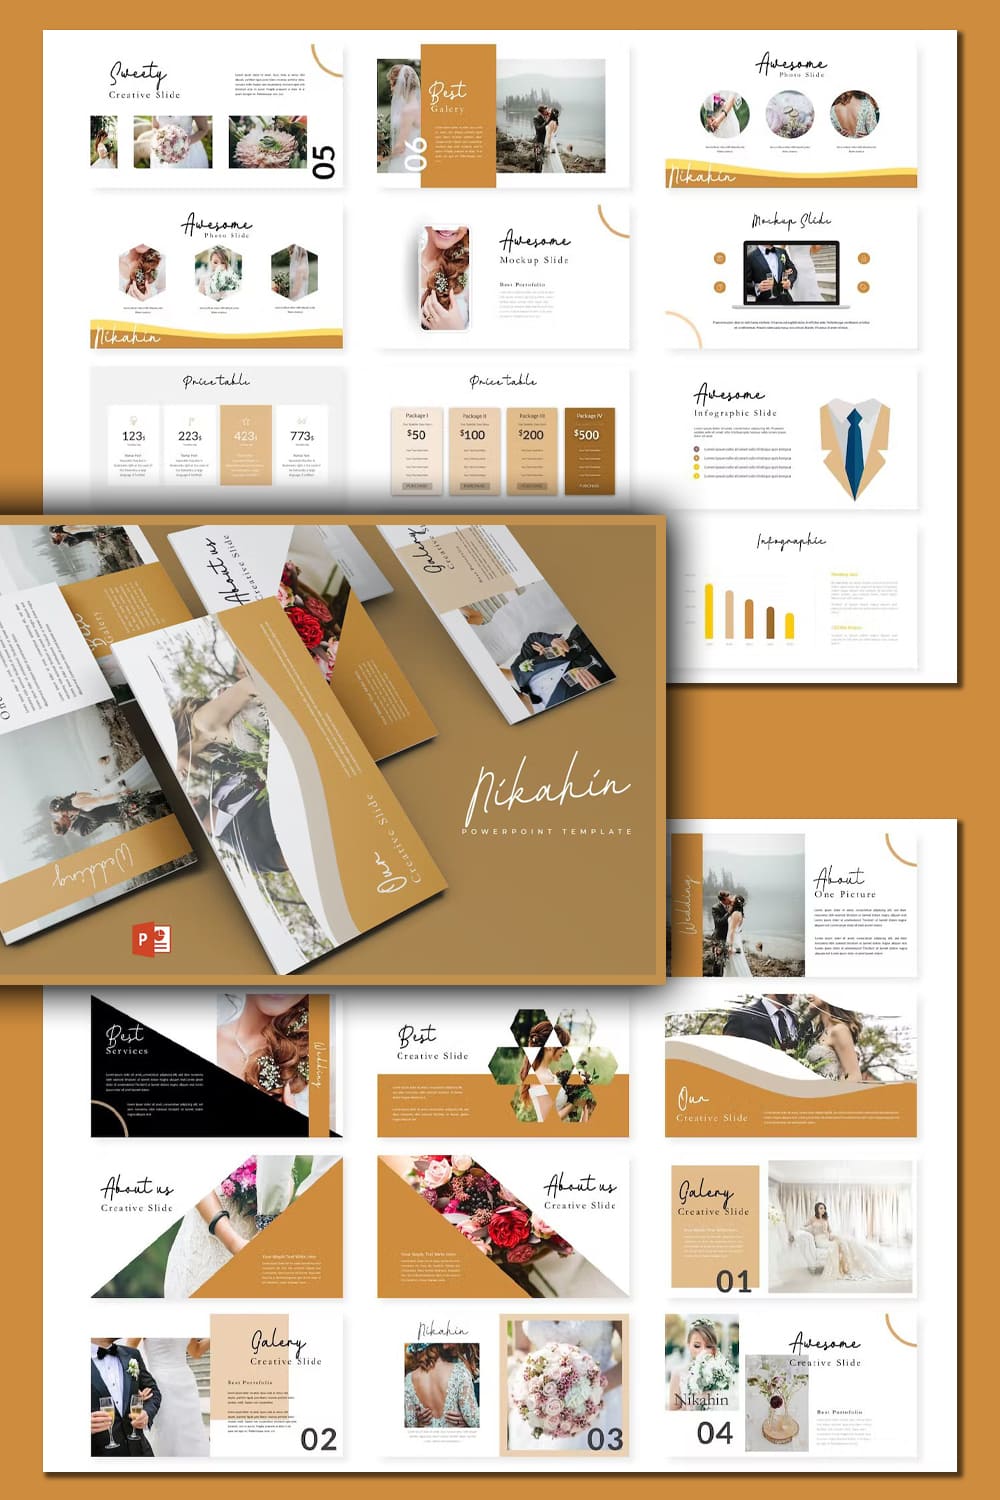 Bundle of images of marvelous presentation template slides in brown and white colors.